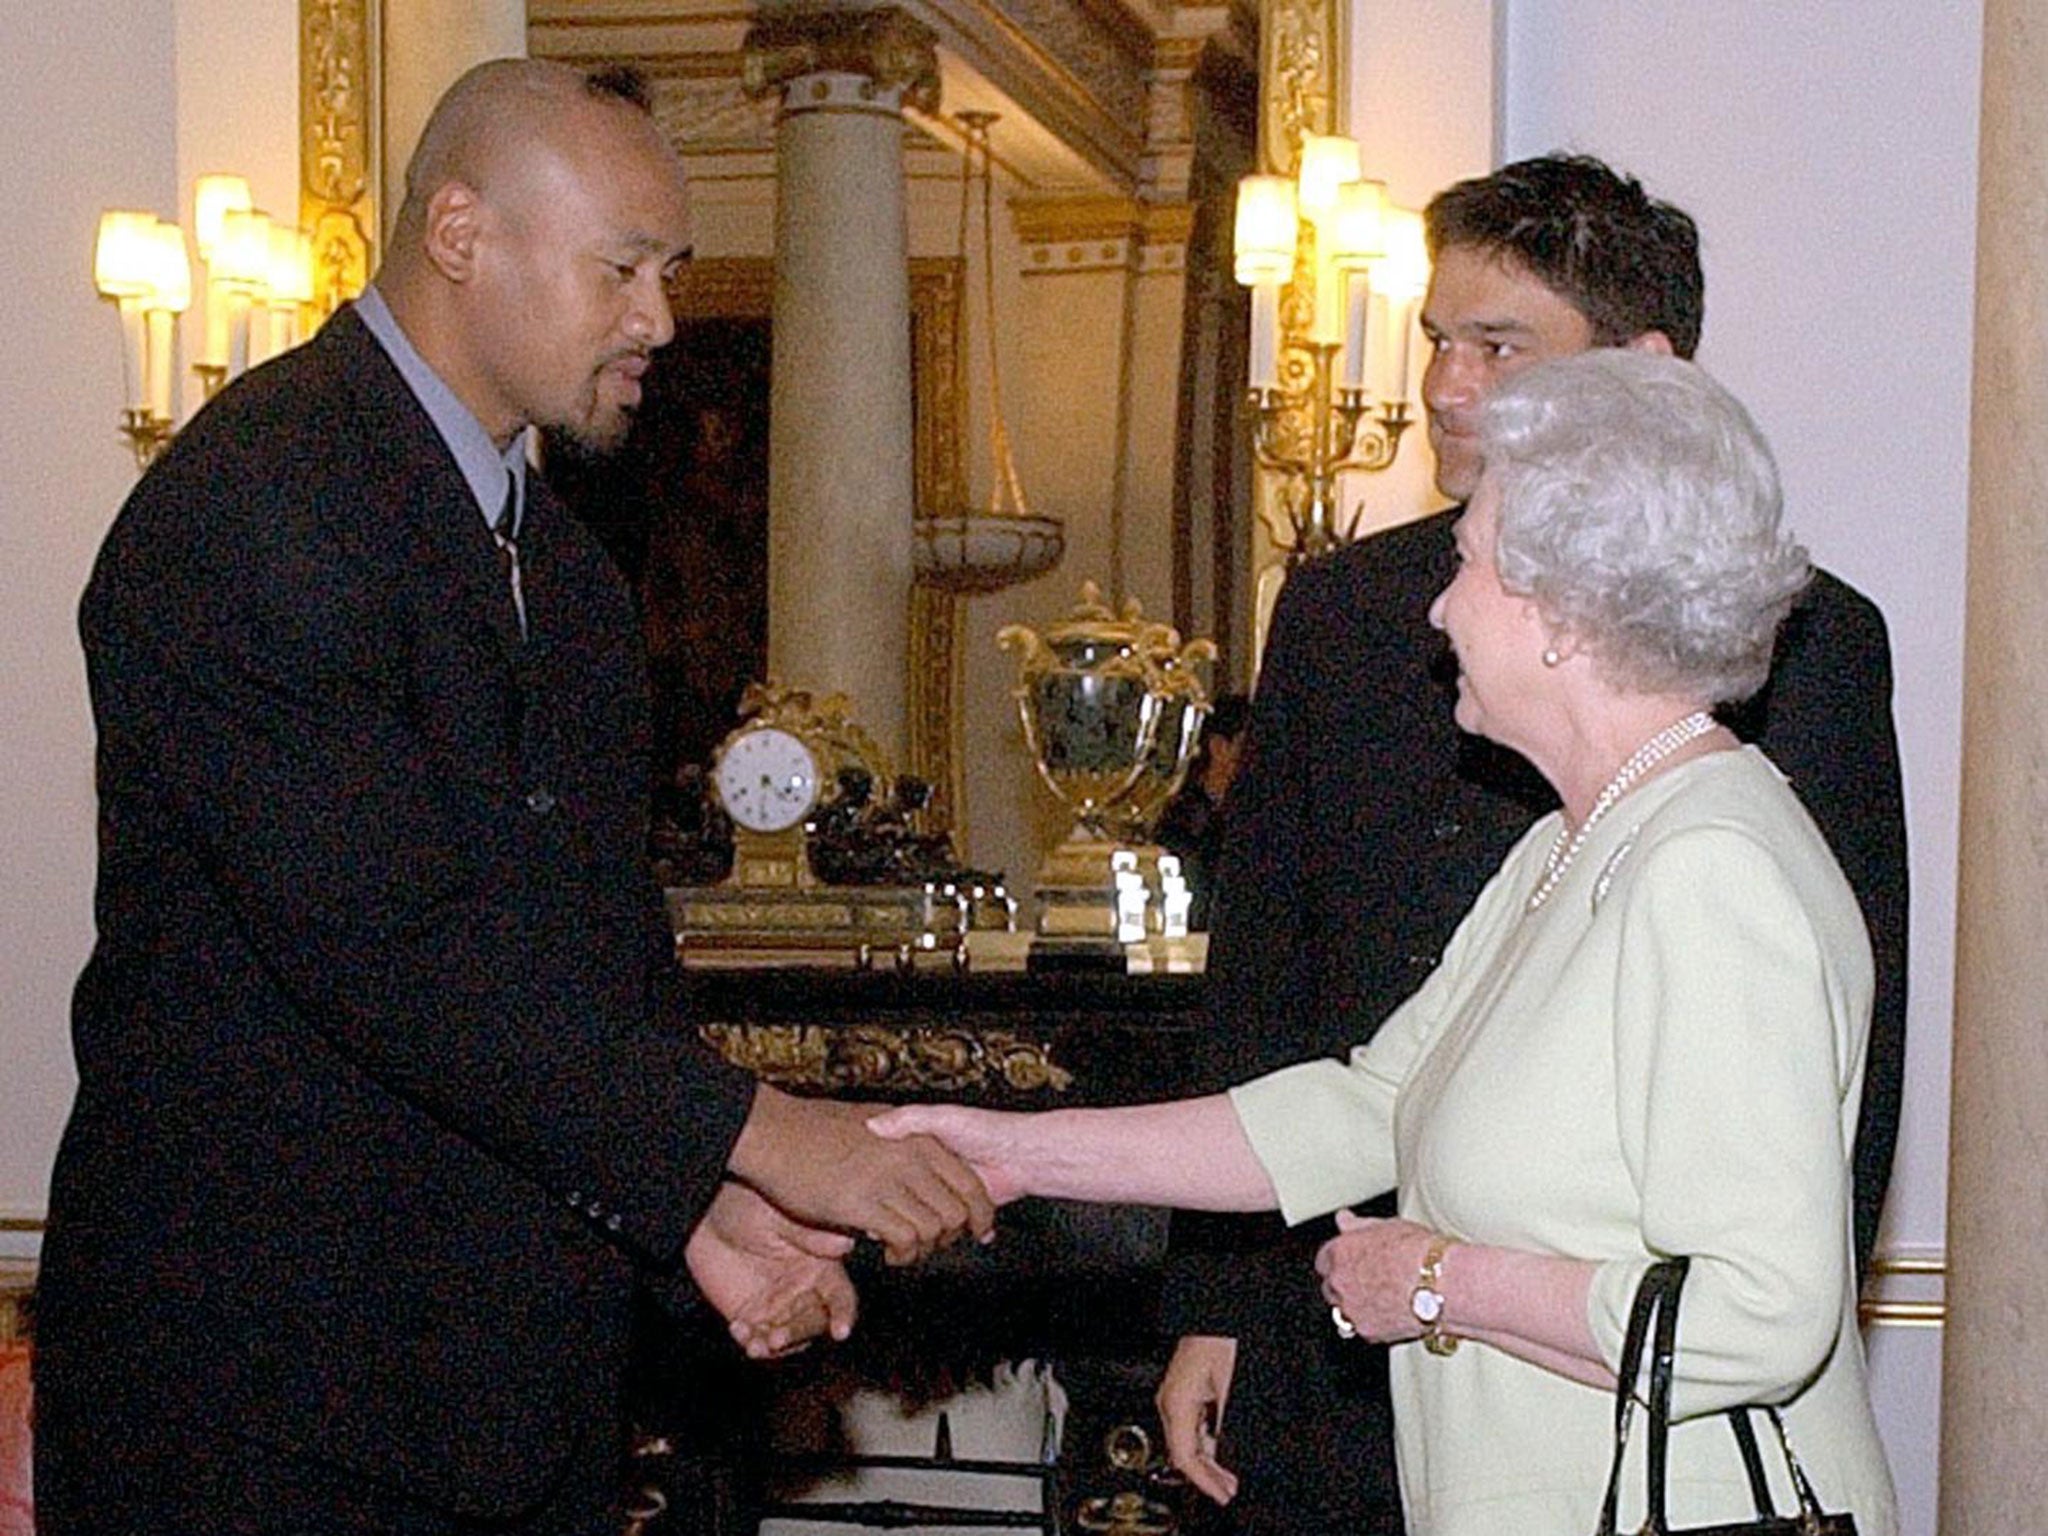 Jonah Lomu meets the Queen at Buckingham Palace in 2002